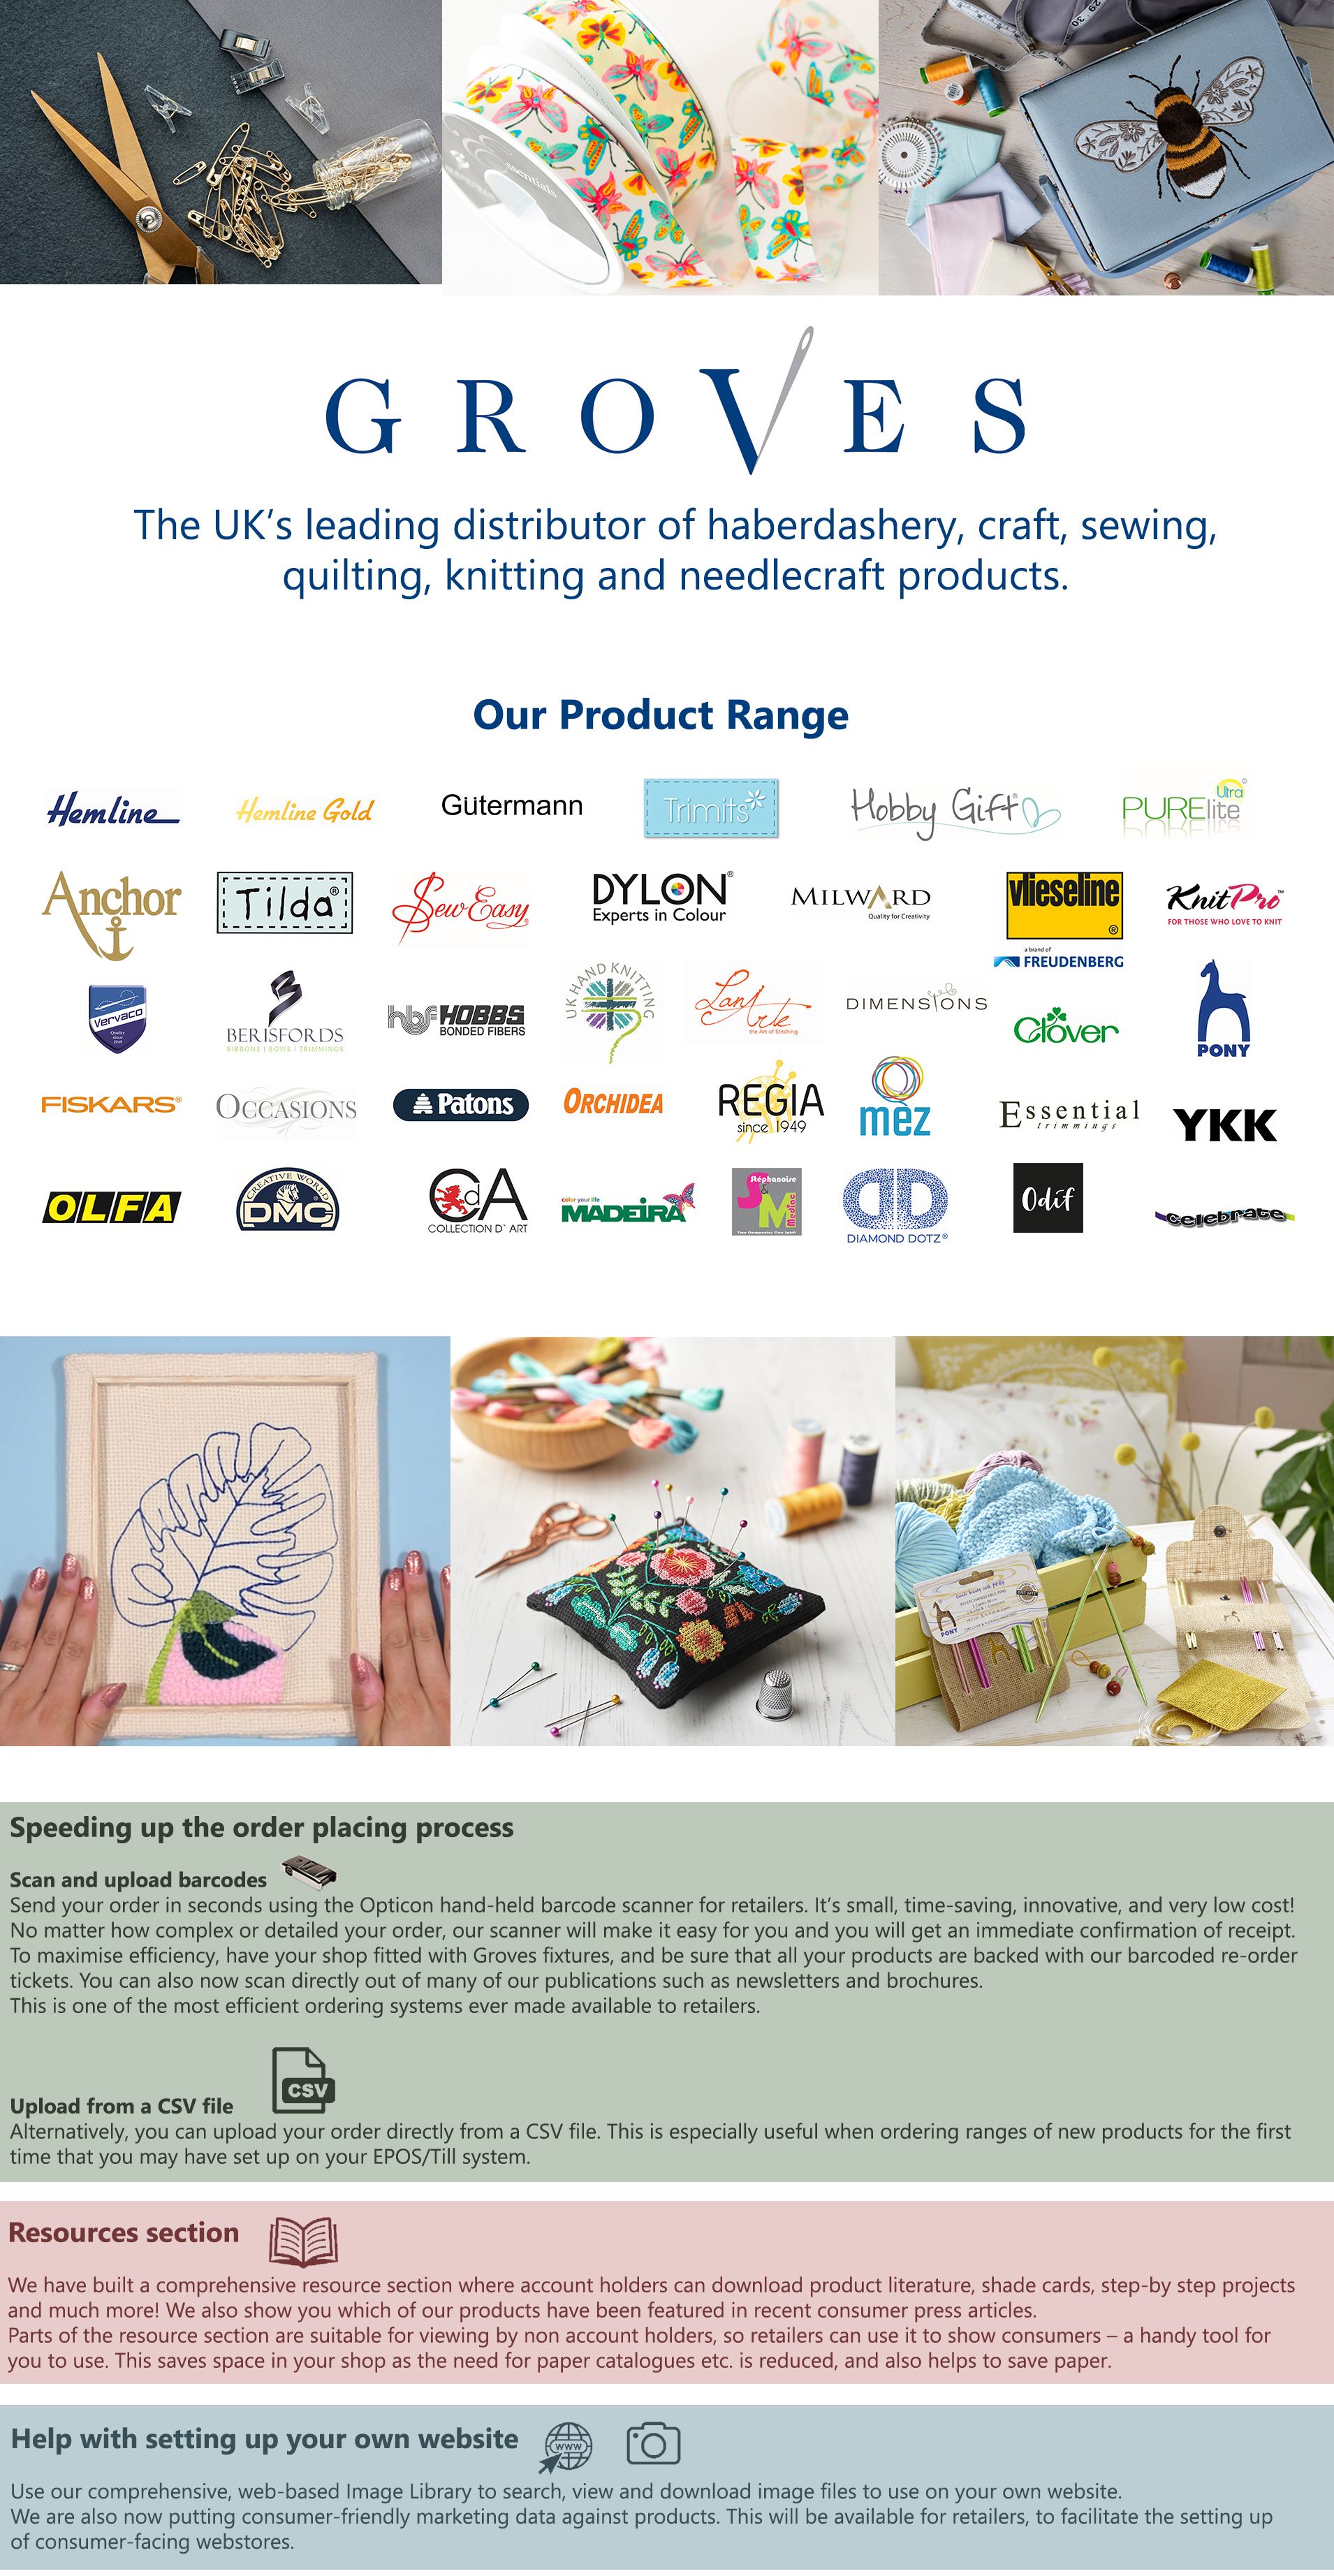 Our product range